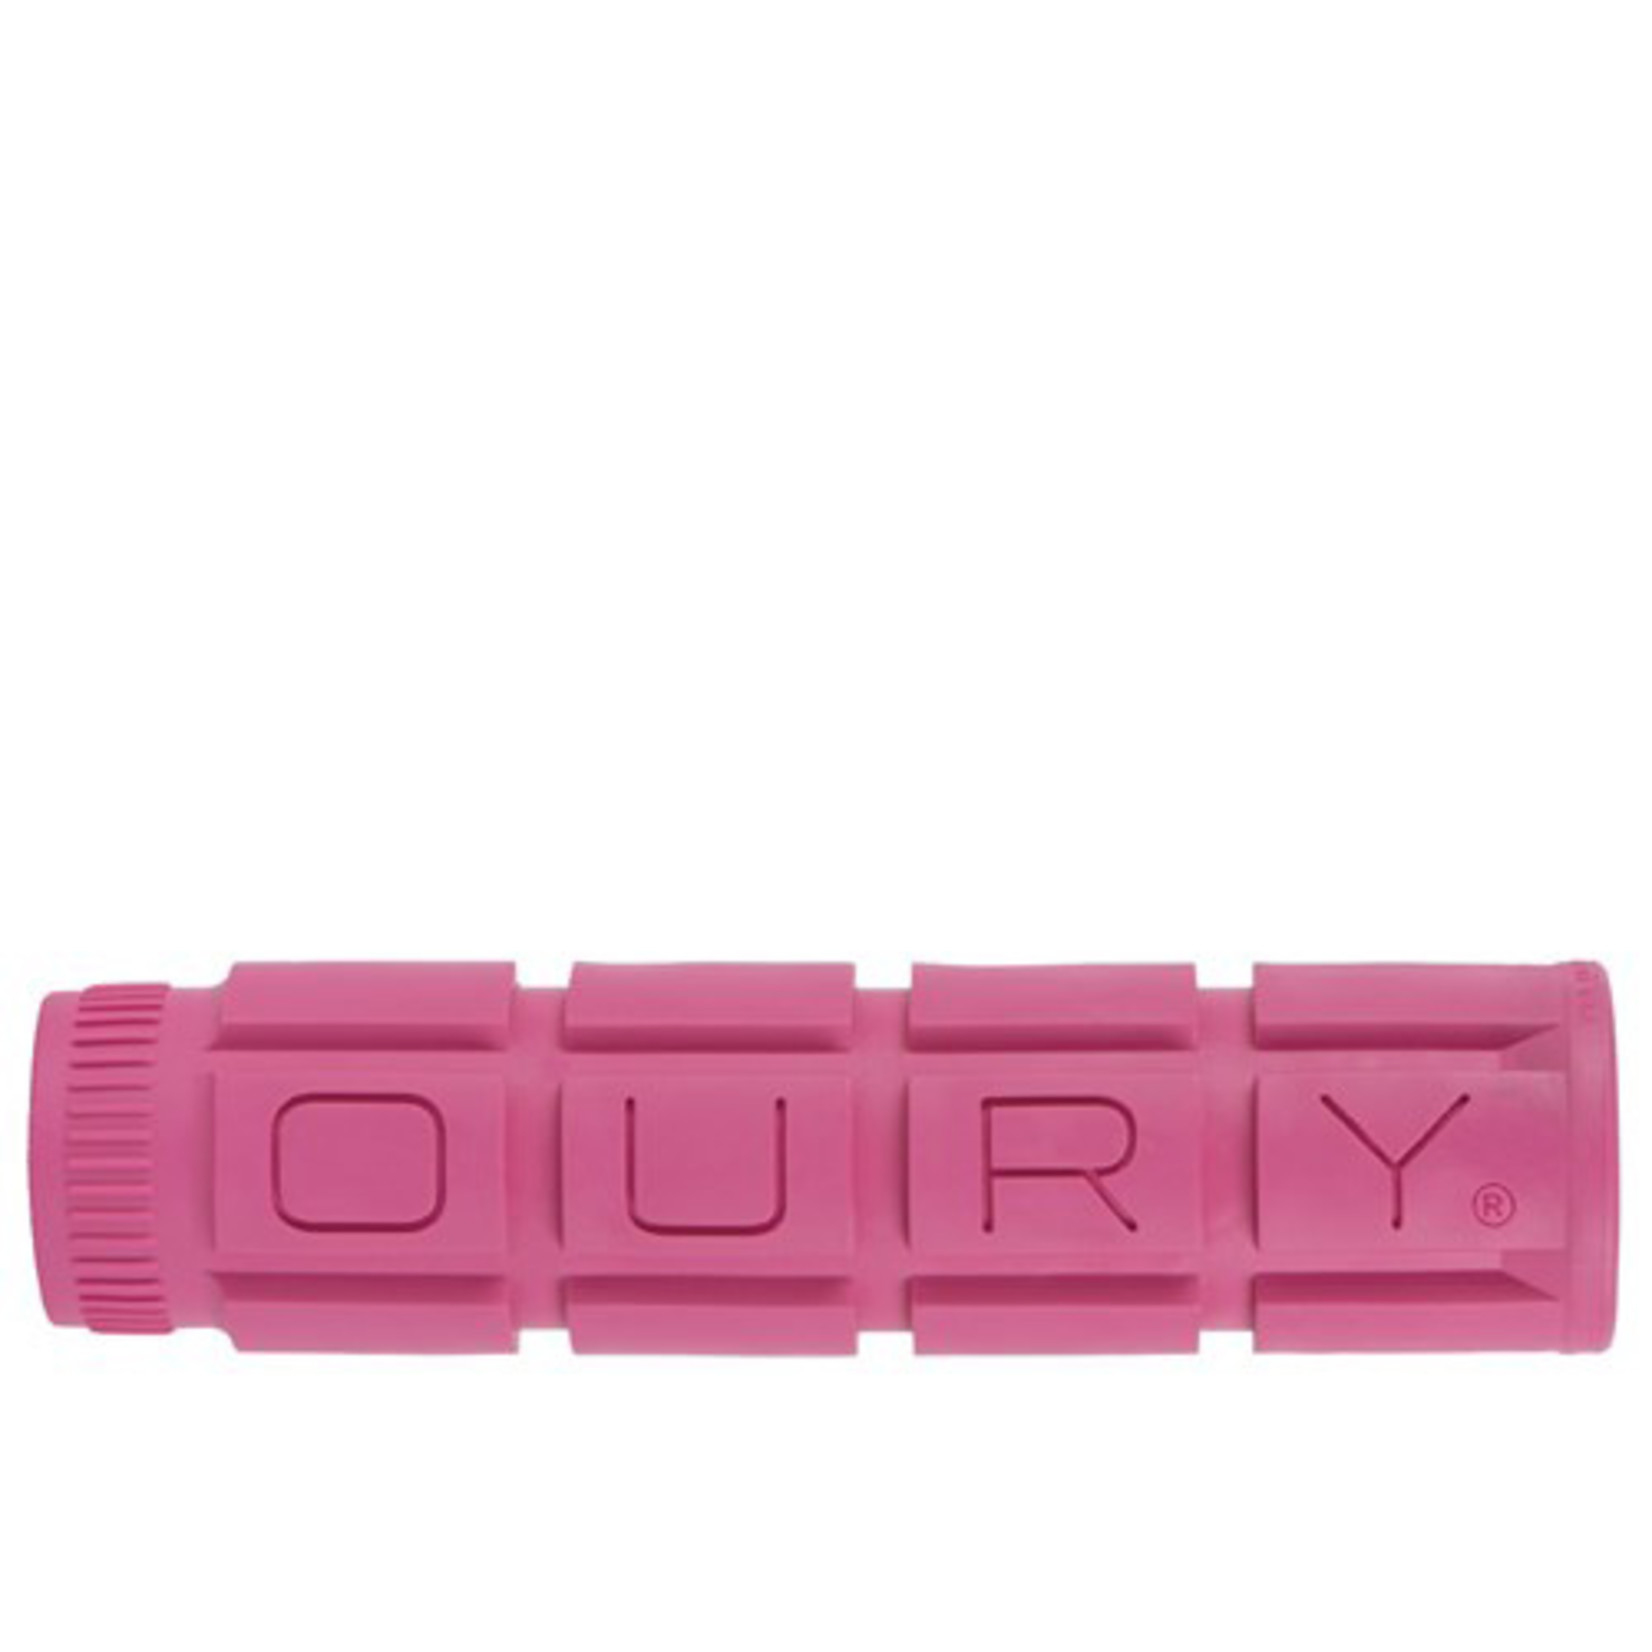 Oury Oury Single Compound Bike Handlebar Grips V2 - Anti-Vibration - 135mm - Pink